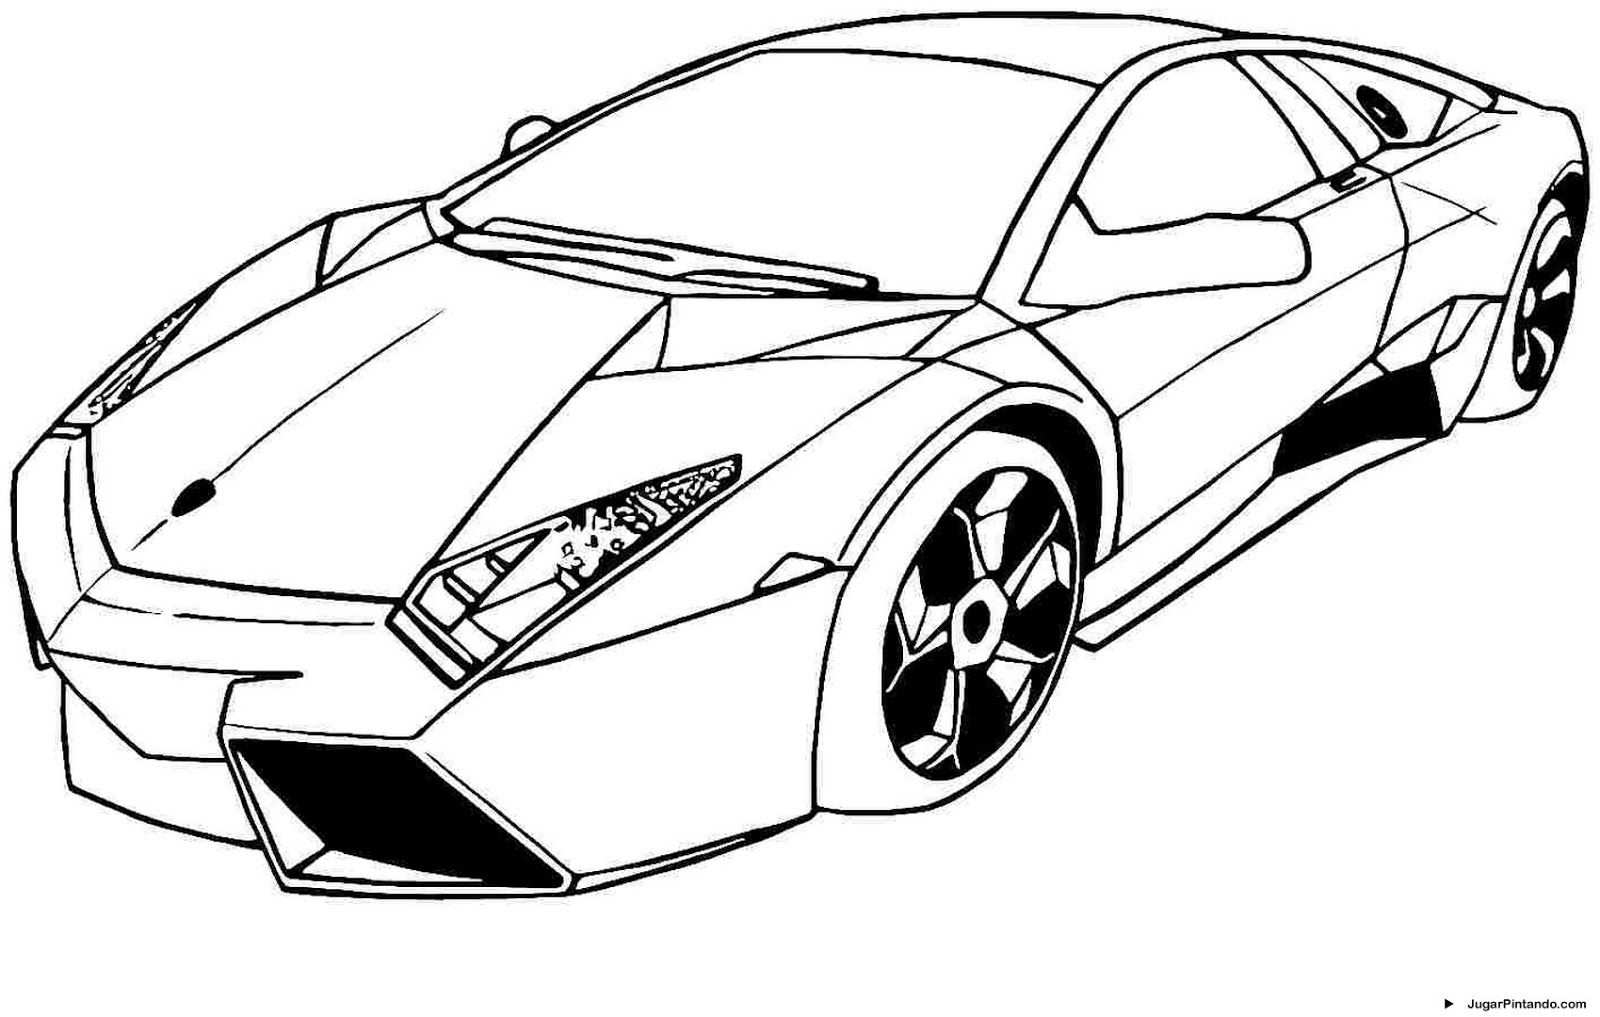 Cars Silhouettes Cars Coloring Pages Race Car Coloring Pages